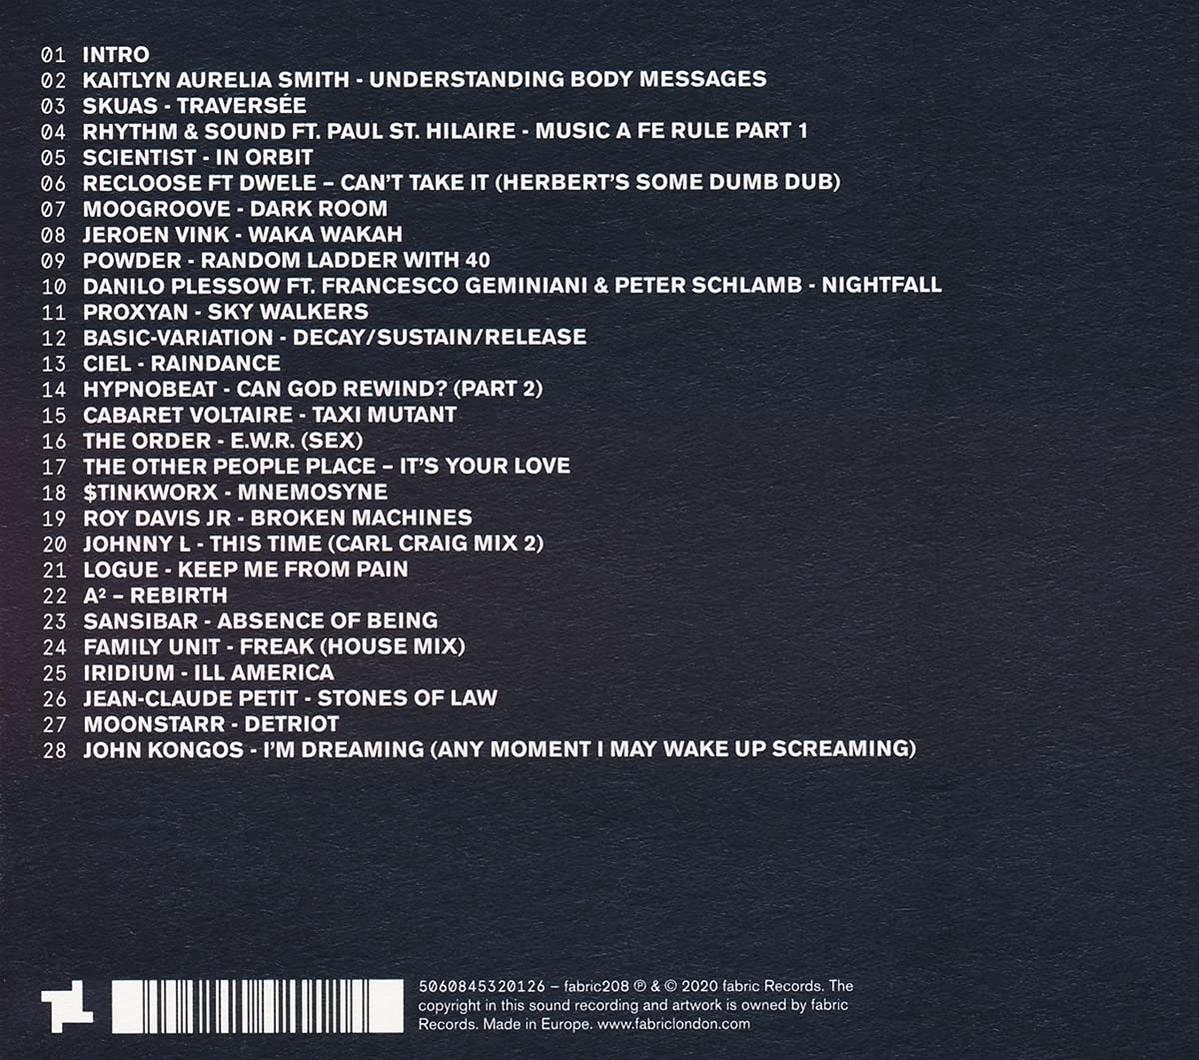 - Presents: Plessow VARIOUS (CD) (MCDE) - Fabric Danilo